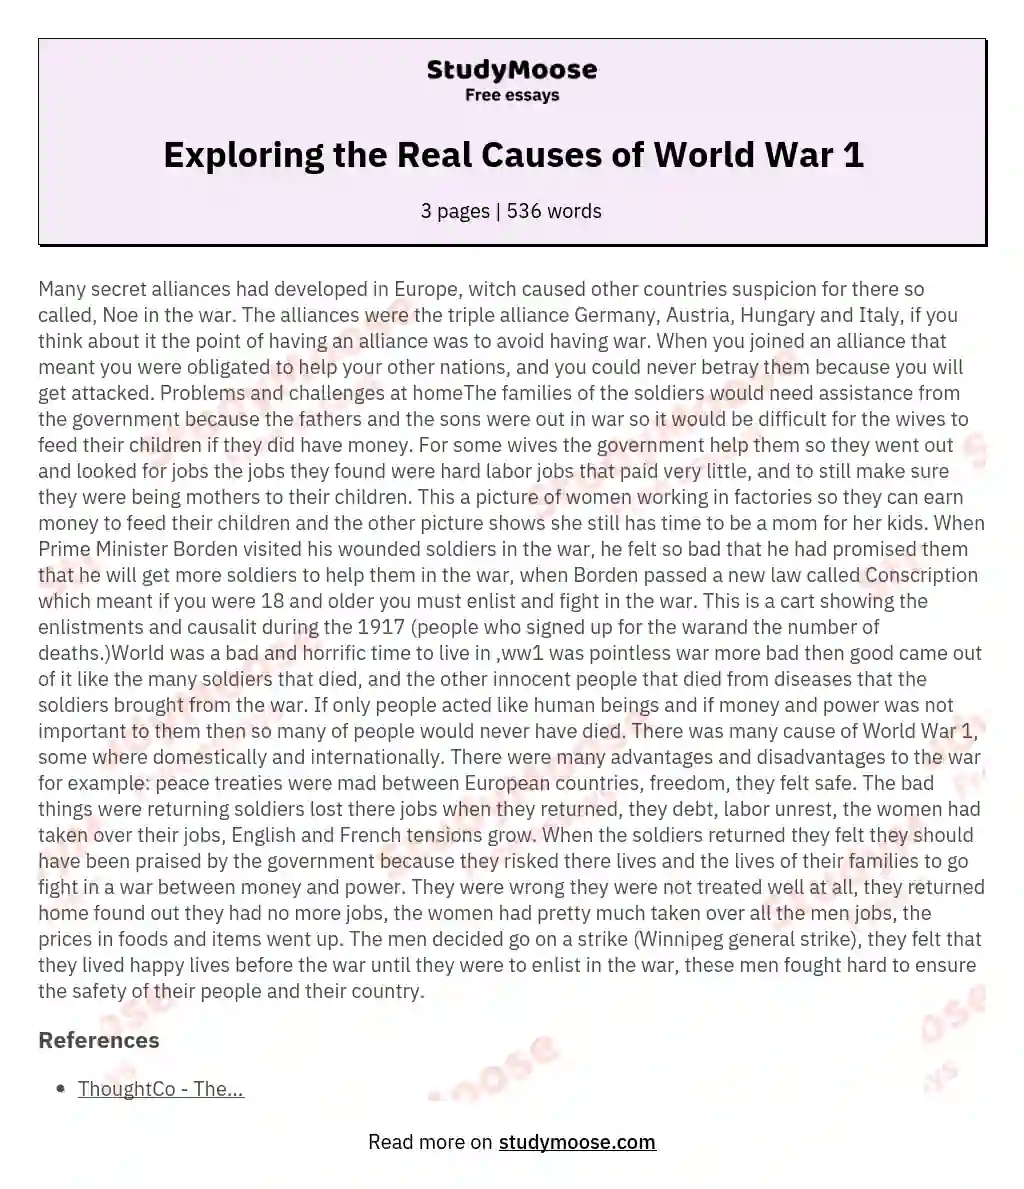 Exploring the Real Causes of World War 1 essay